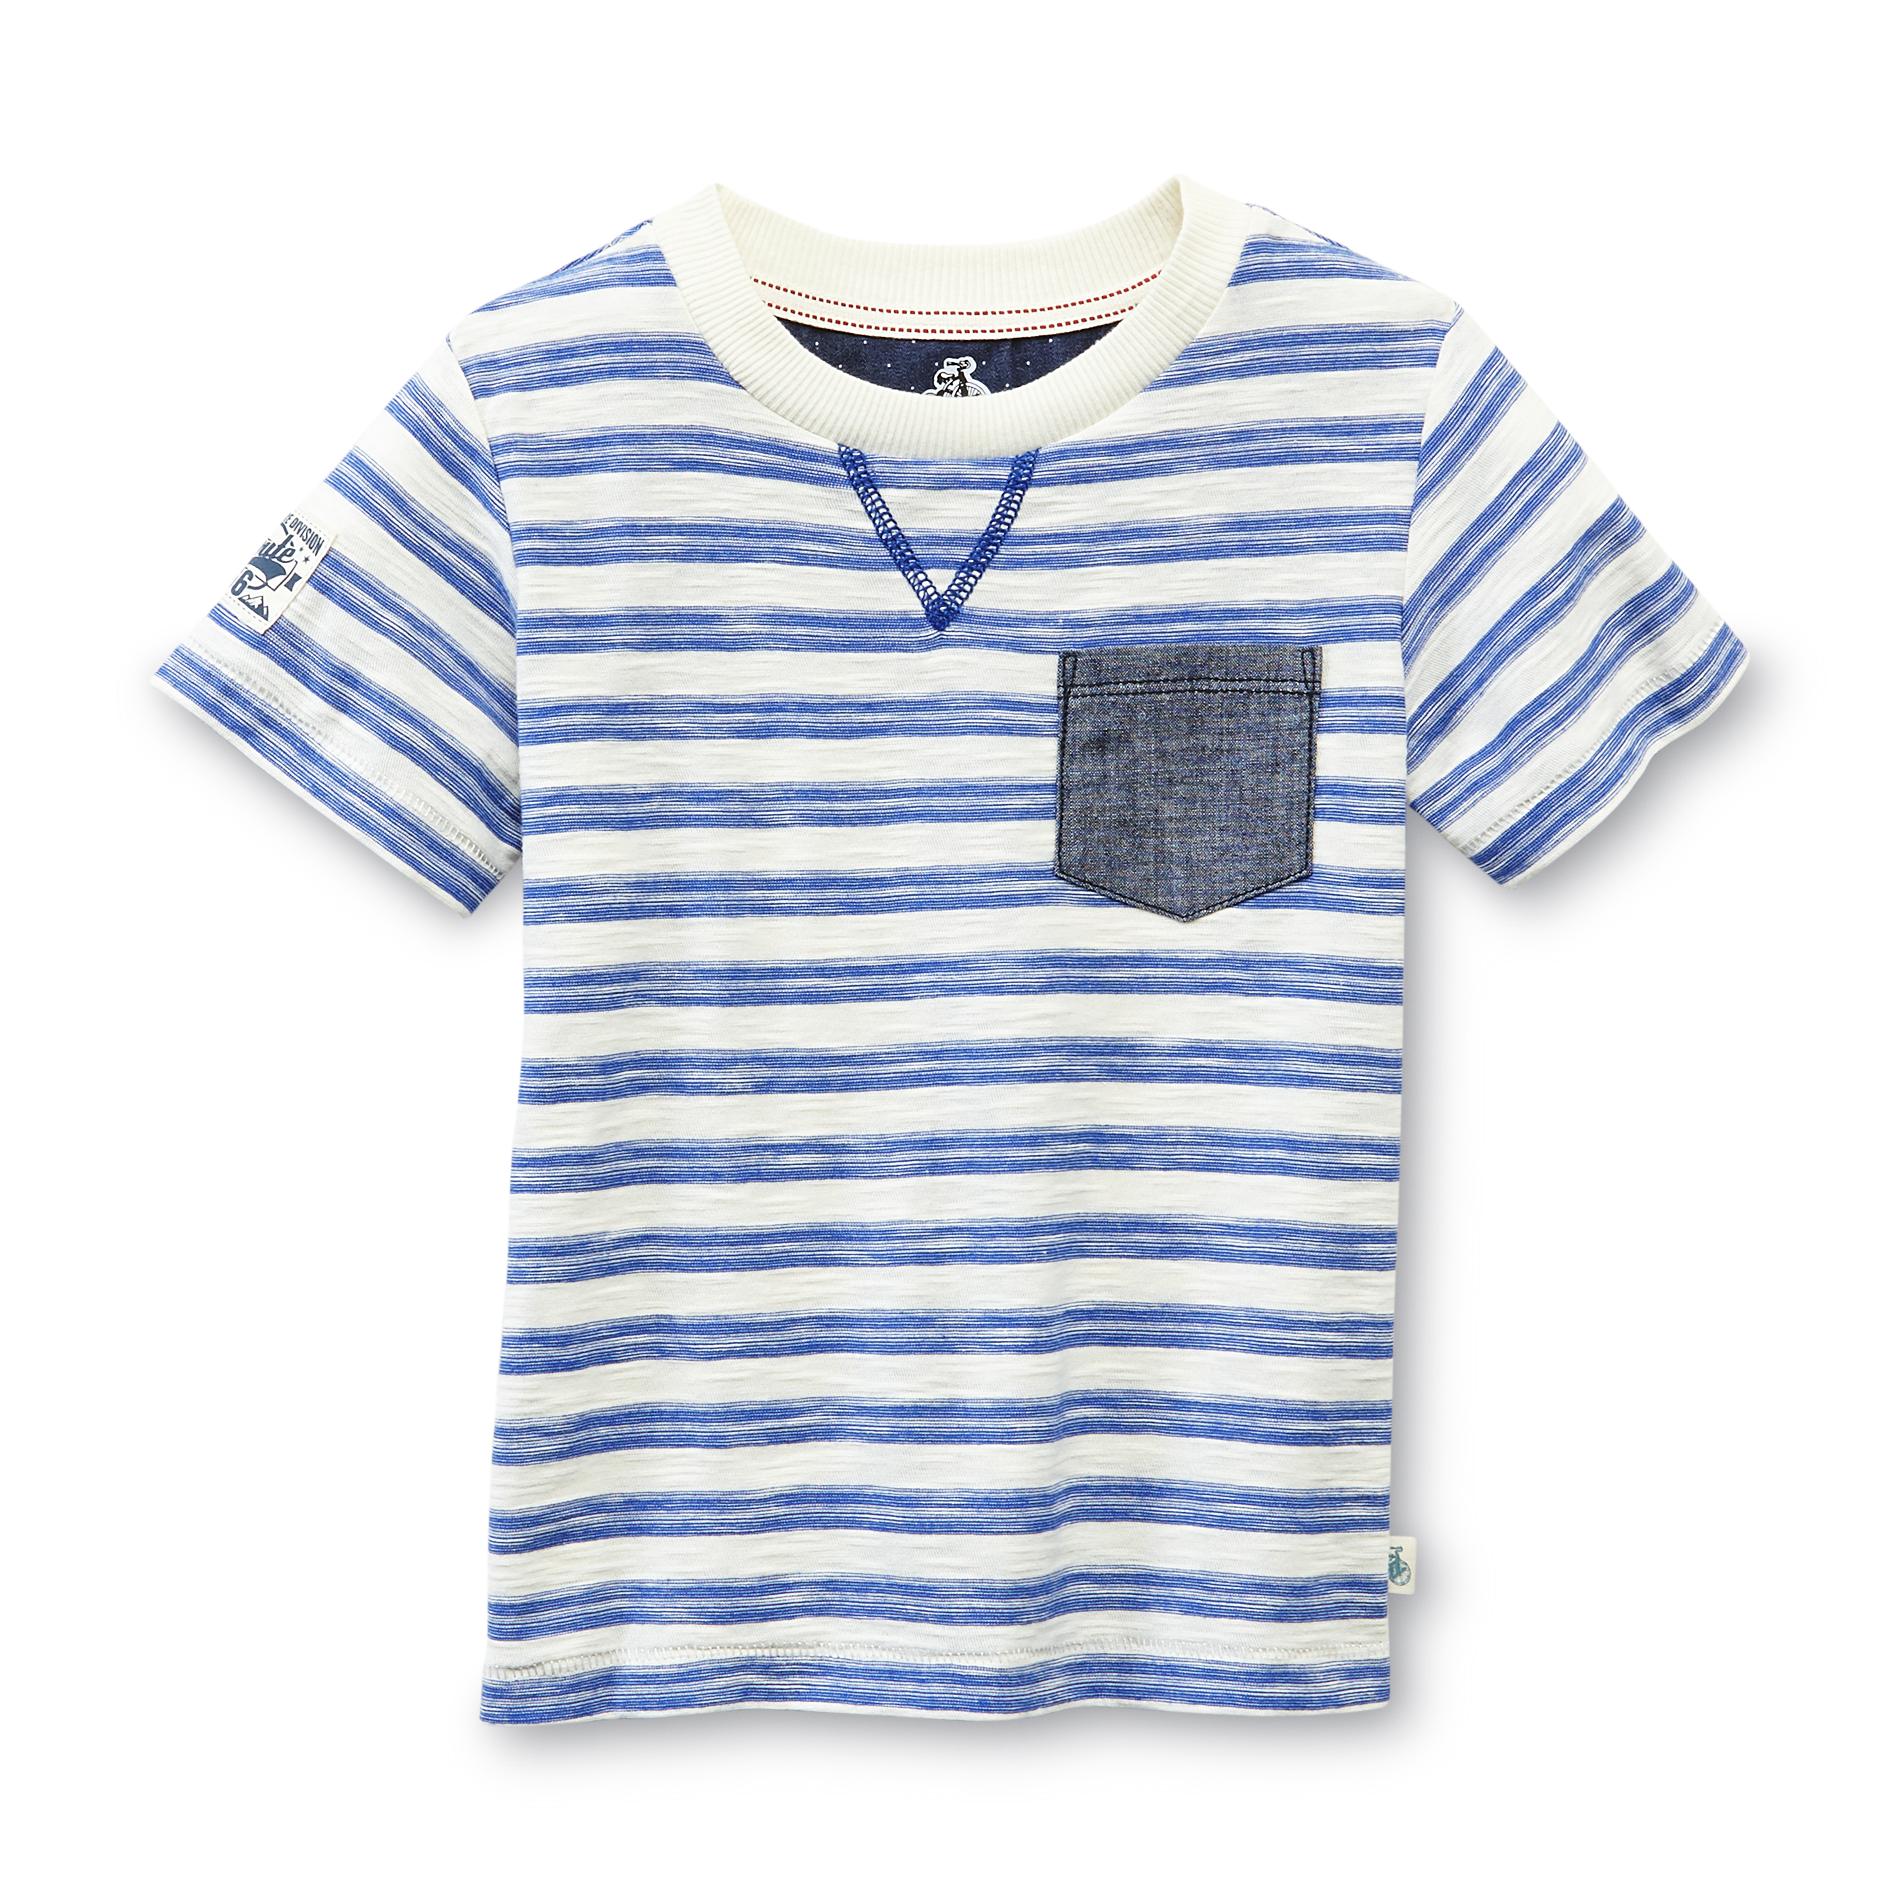 Route 66 Baby Infant & Toddler Boy's Slub-Knit Graphic T-Shirt - Striped